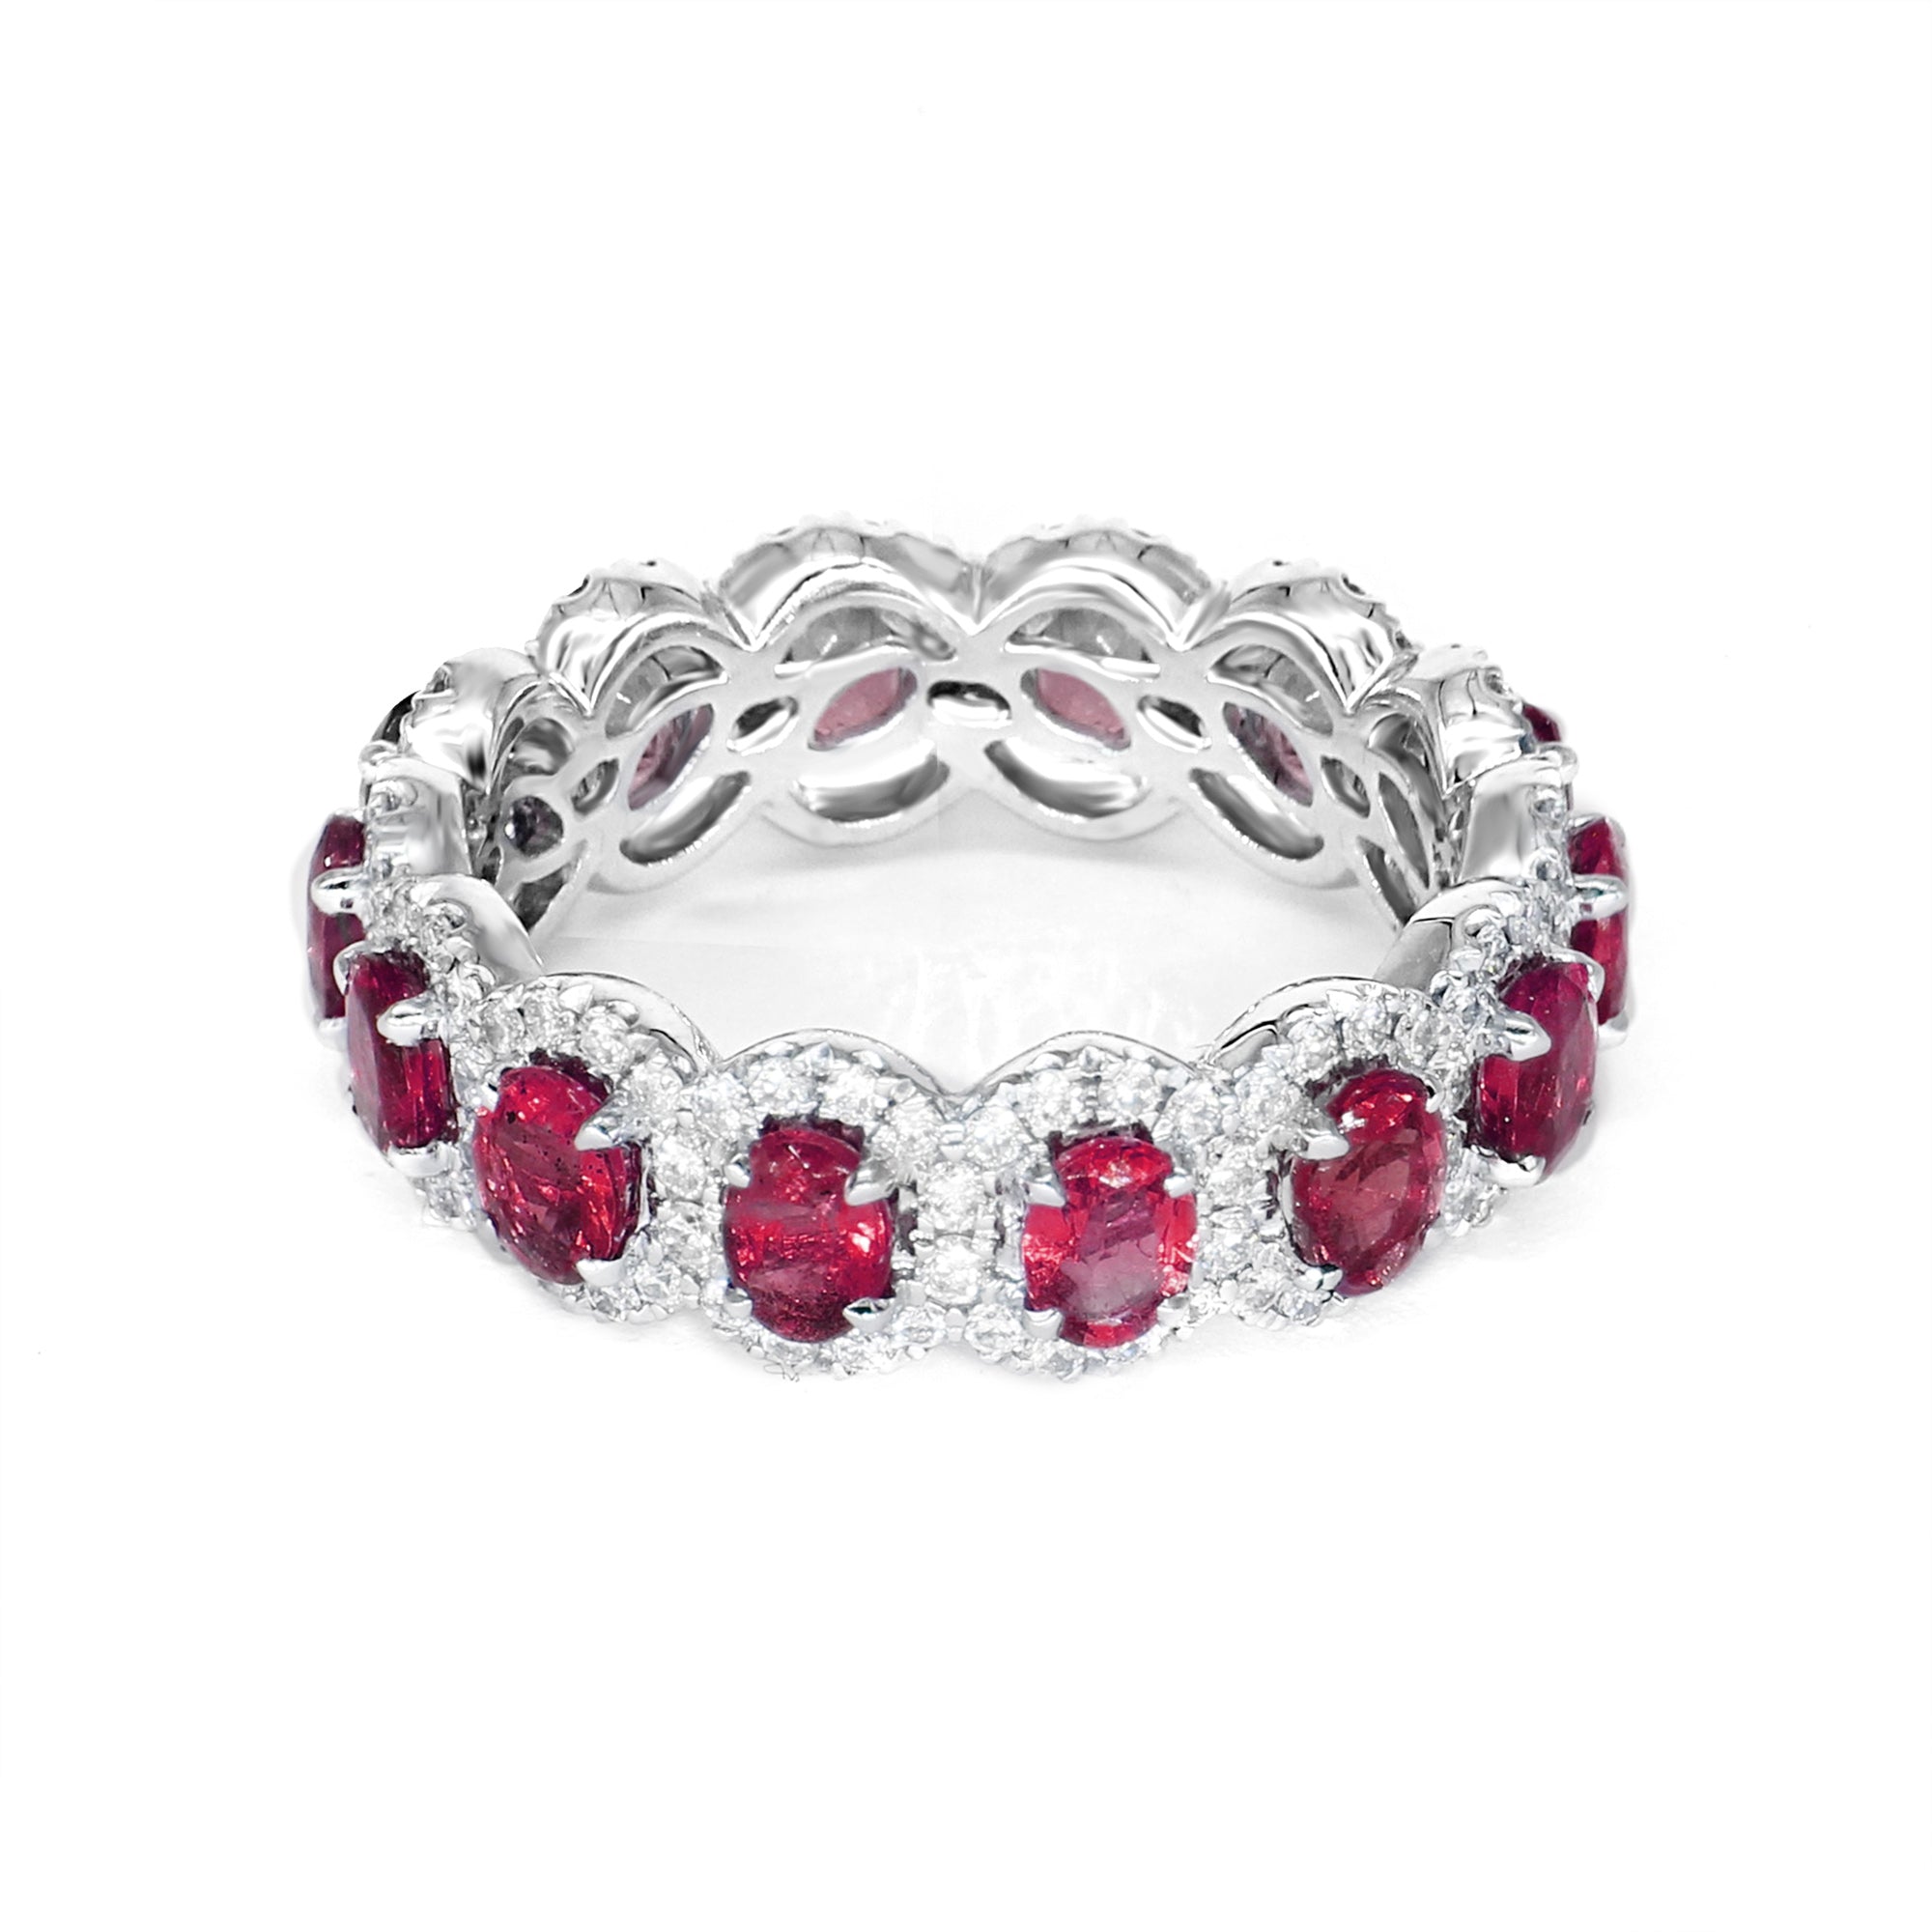 3.17 ct. Genuine Oval Ruby Eternity Ring With 0.79 ct. Diamond Halo-in 14K/18K White, Yellow, Rose Gold and Platinum - Christmas Jewelry Gift -VIRABYANI